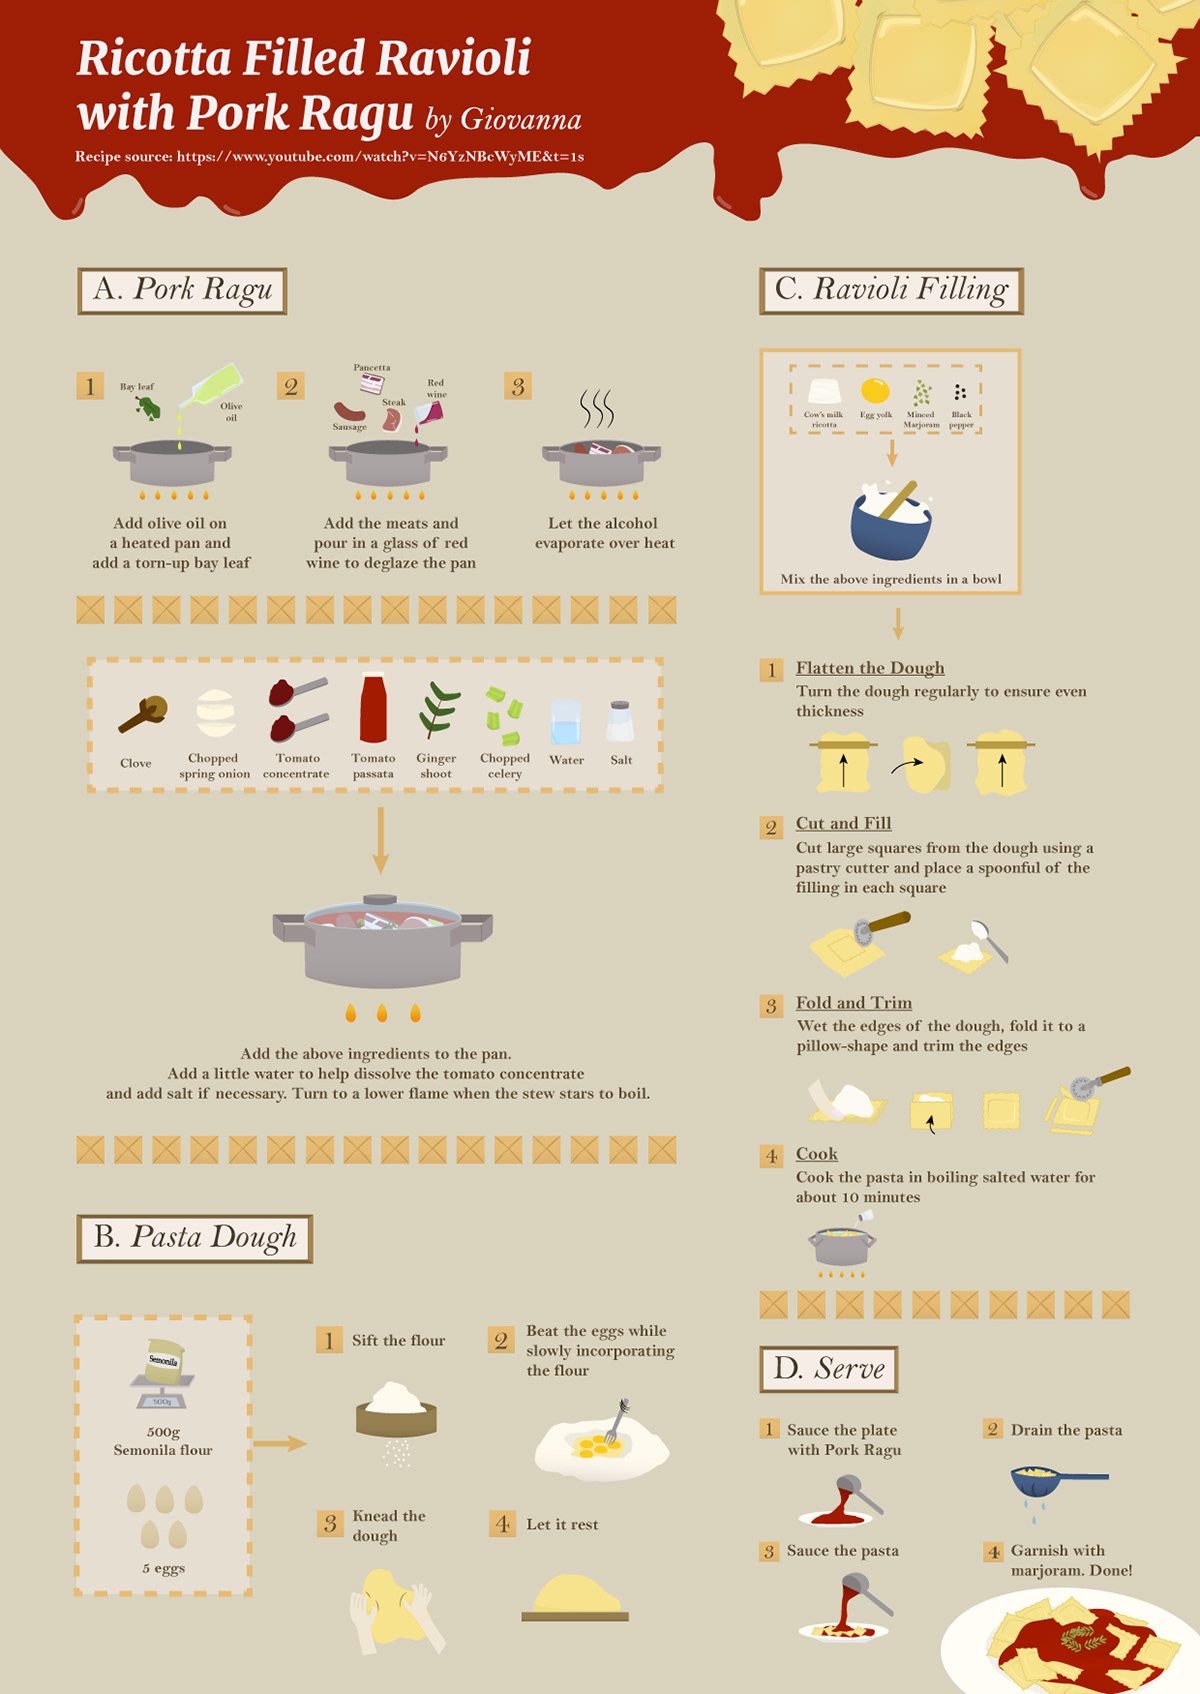 infographic adobe illustrator poster information design Adobe After Effects recipe Italy